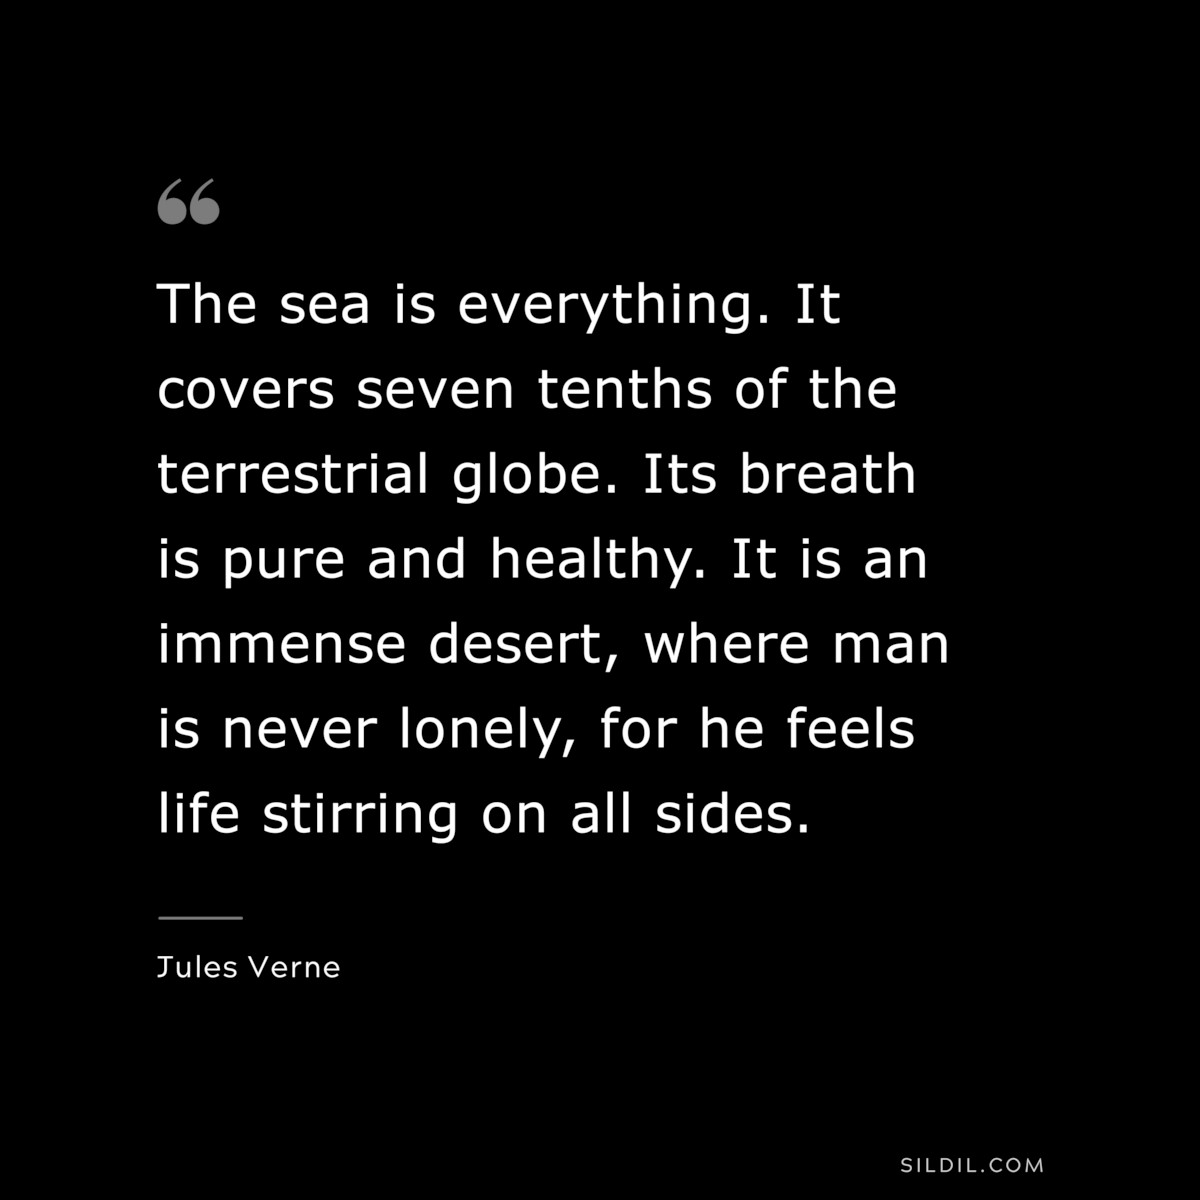 The sea is everything. It covers seven tenths of the terrestrial globe. Its breath is pure and healthy. It is an immense desert, where man is never lonely, for he feels life stirring on all sides.